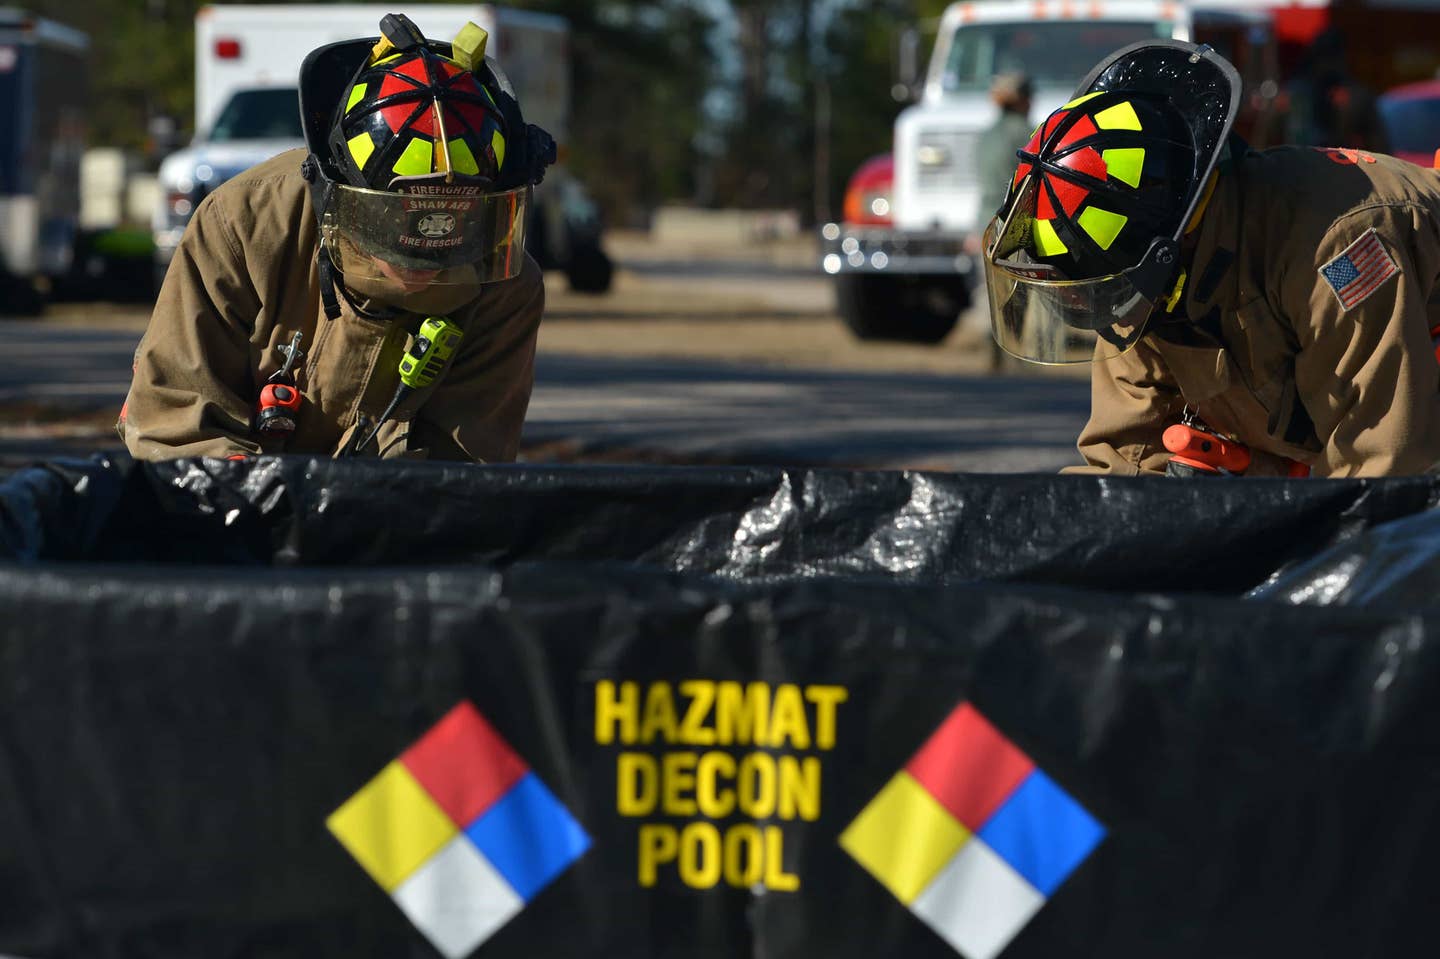 U.S. Airmen assigned to the 20th Civil Engineer Squadron fire department assemble a hazardous material decontamination (HAZMAT) pool during training at Shaw Air Force Base, S.C., Jan. 19, 2017. During the joint simulated chemical spill training, fire fighters established cordons and assembled HAZMAT pools for their wingmen, explosive ordnance disposal and bioenvironmental Airmen, who needed to be decontaminated before departure from the training site. (U.S. Air Force photo by Airman 1st Class Christopher Maldonado)